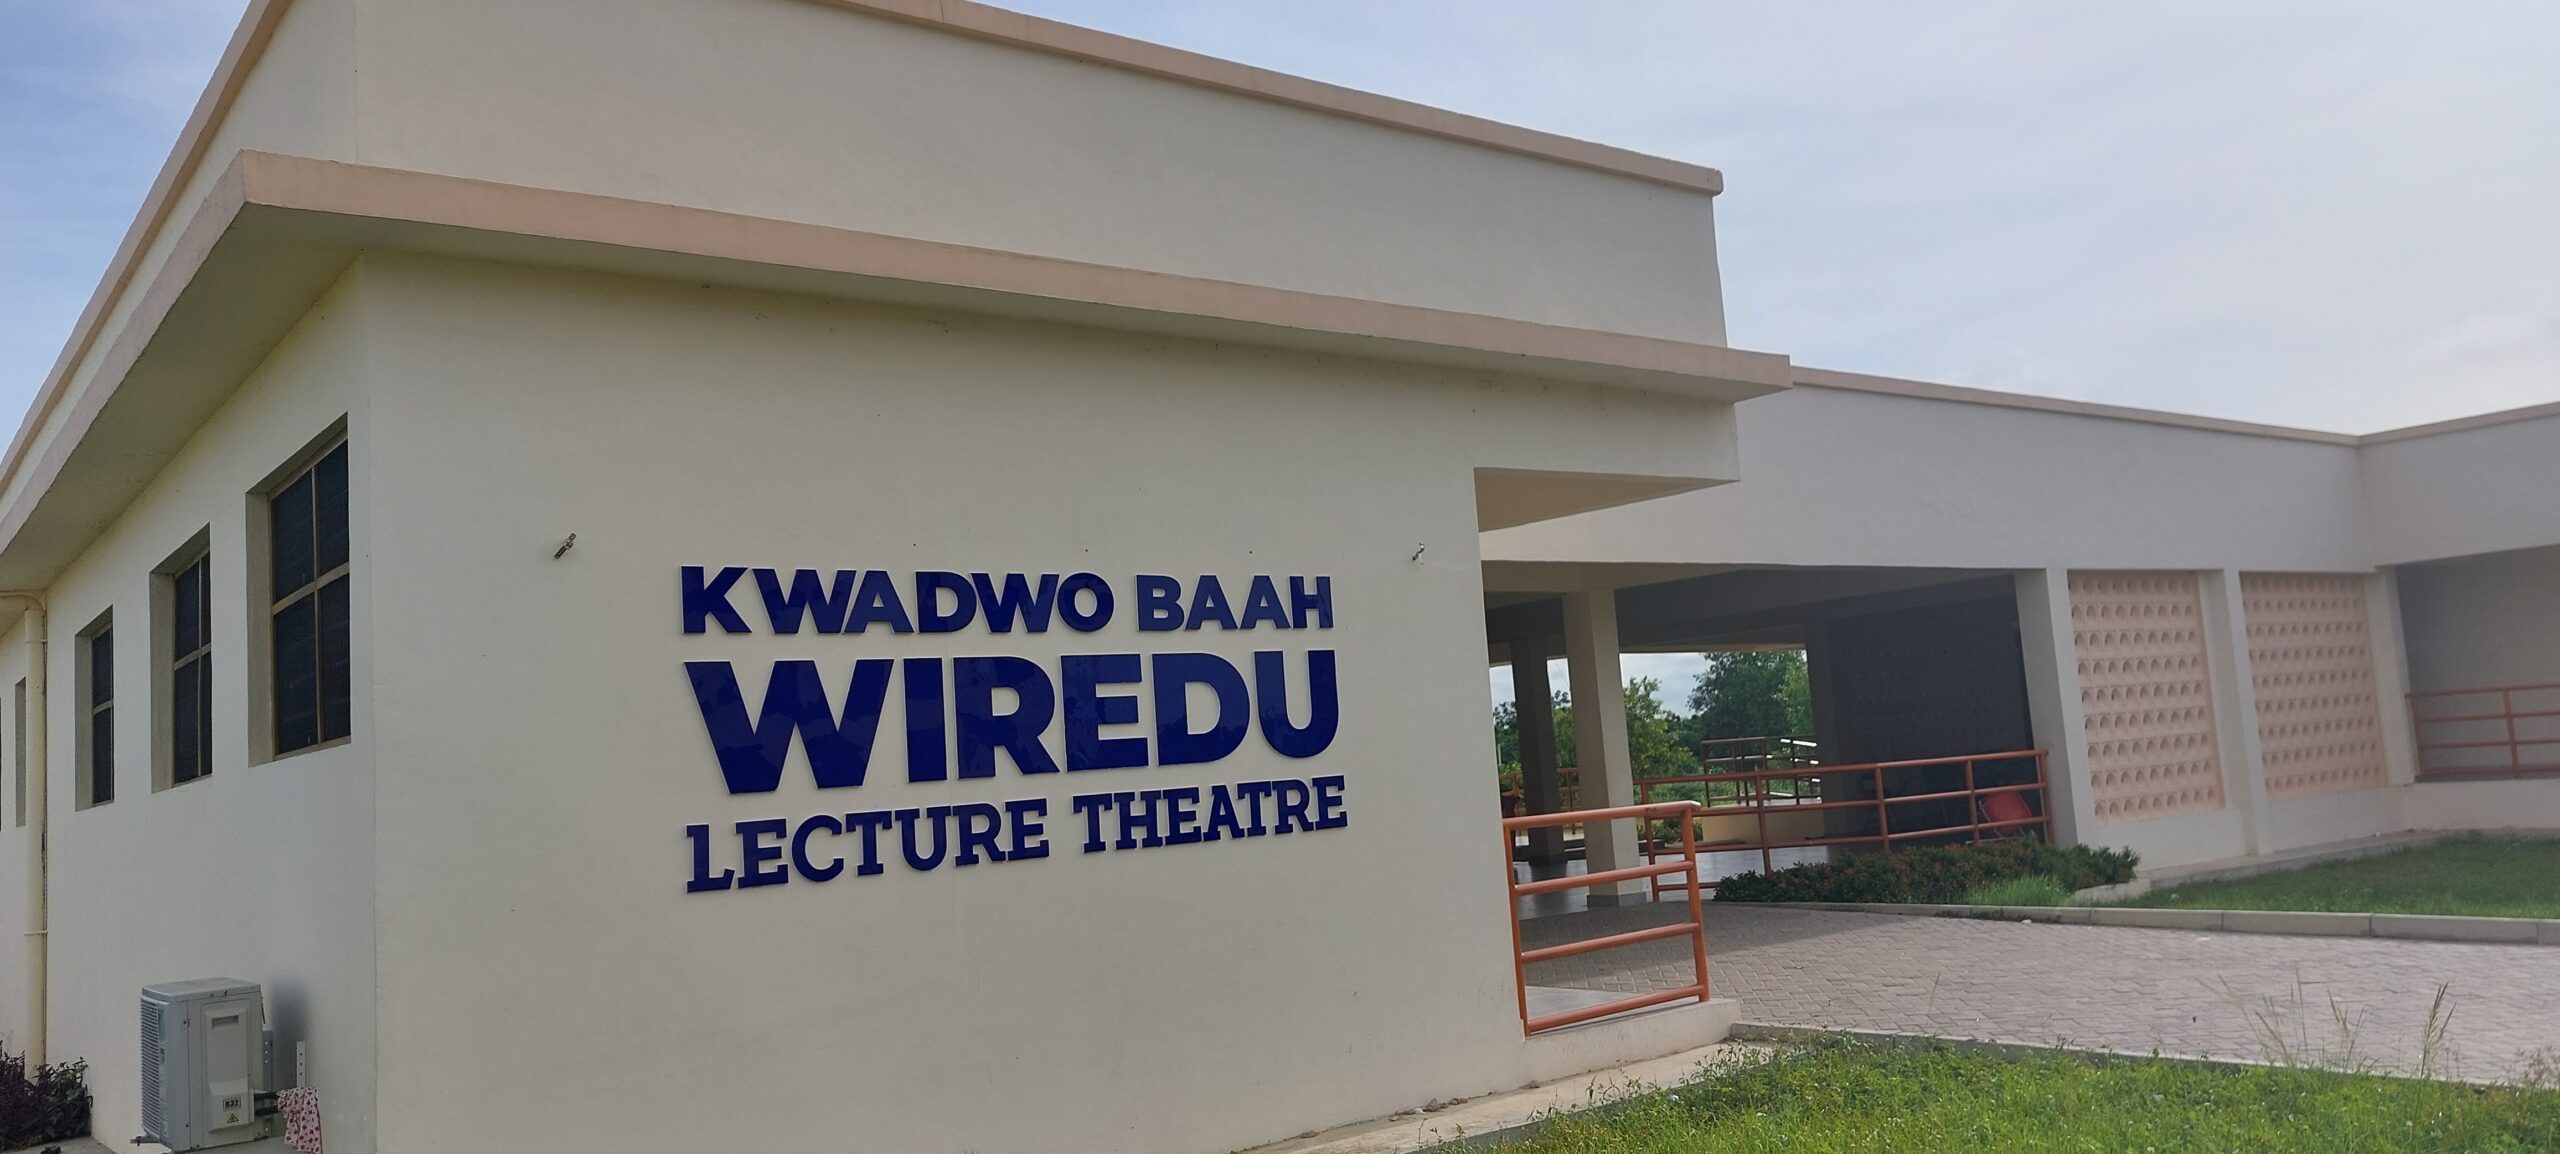 UEW names Lecture Hall after Former Finance Minister Kwadwo Baah-Wiredu